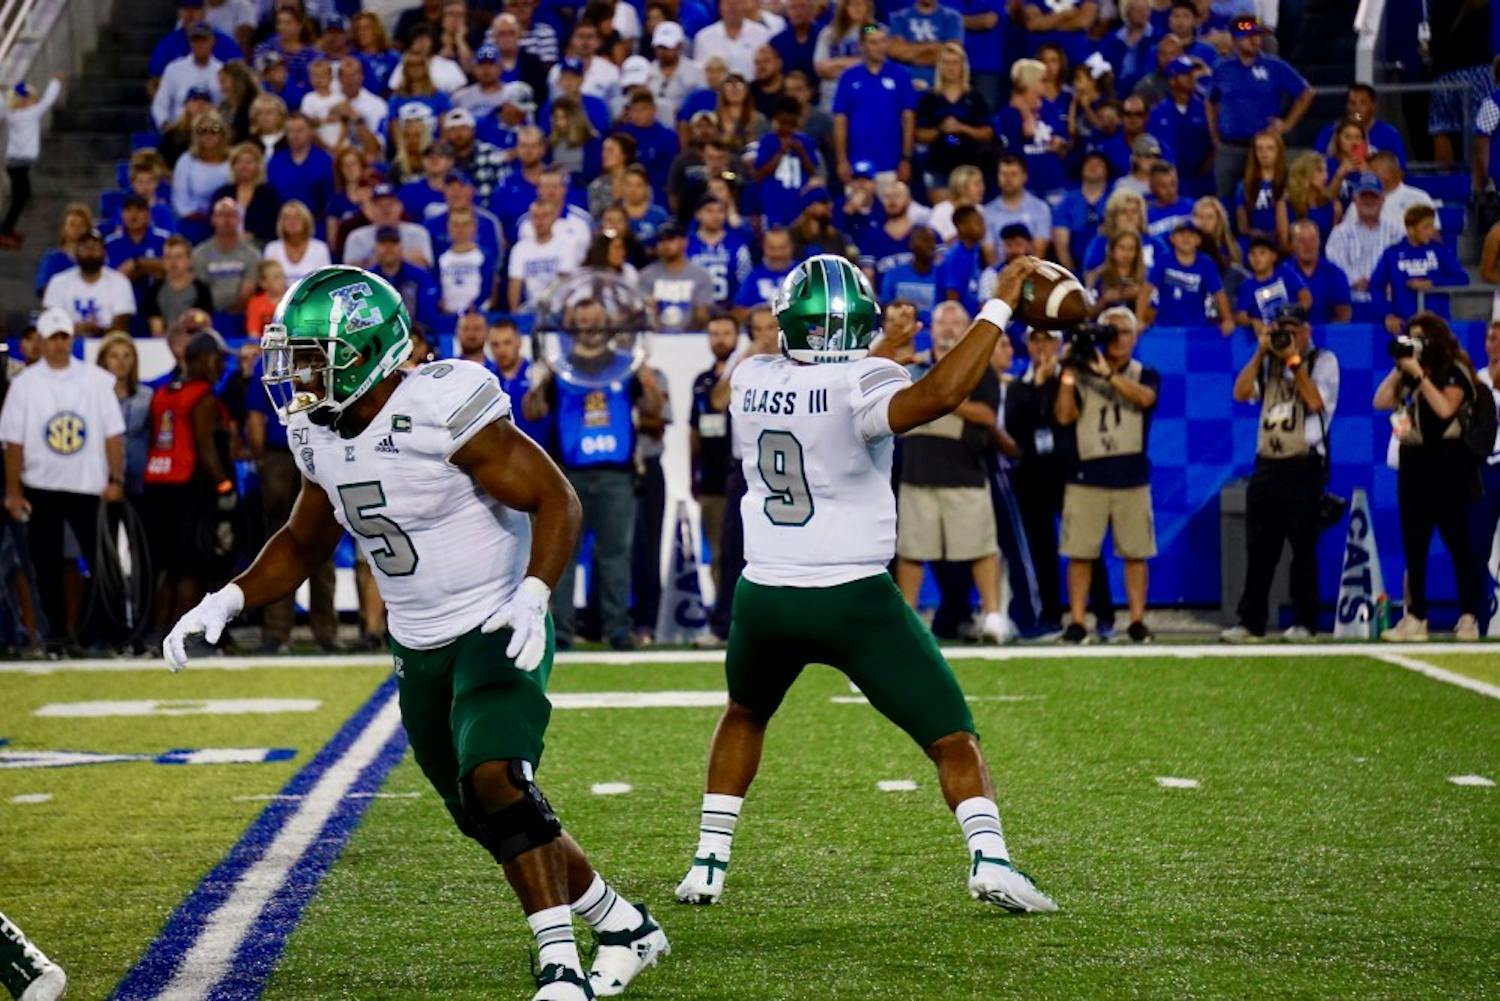 Eastern Michigan football travels to play Kentucky in Lexington